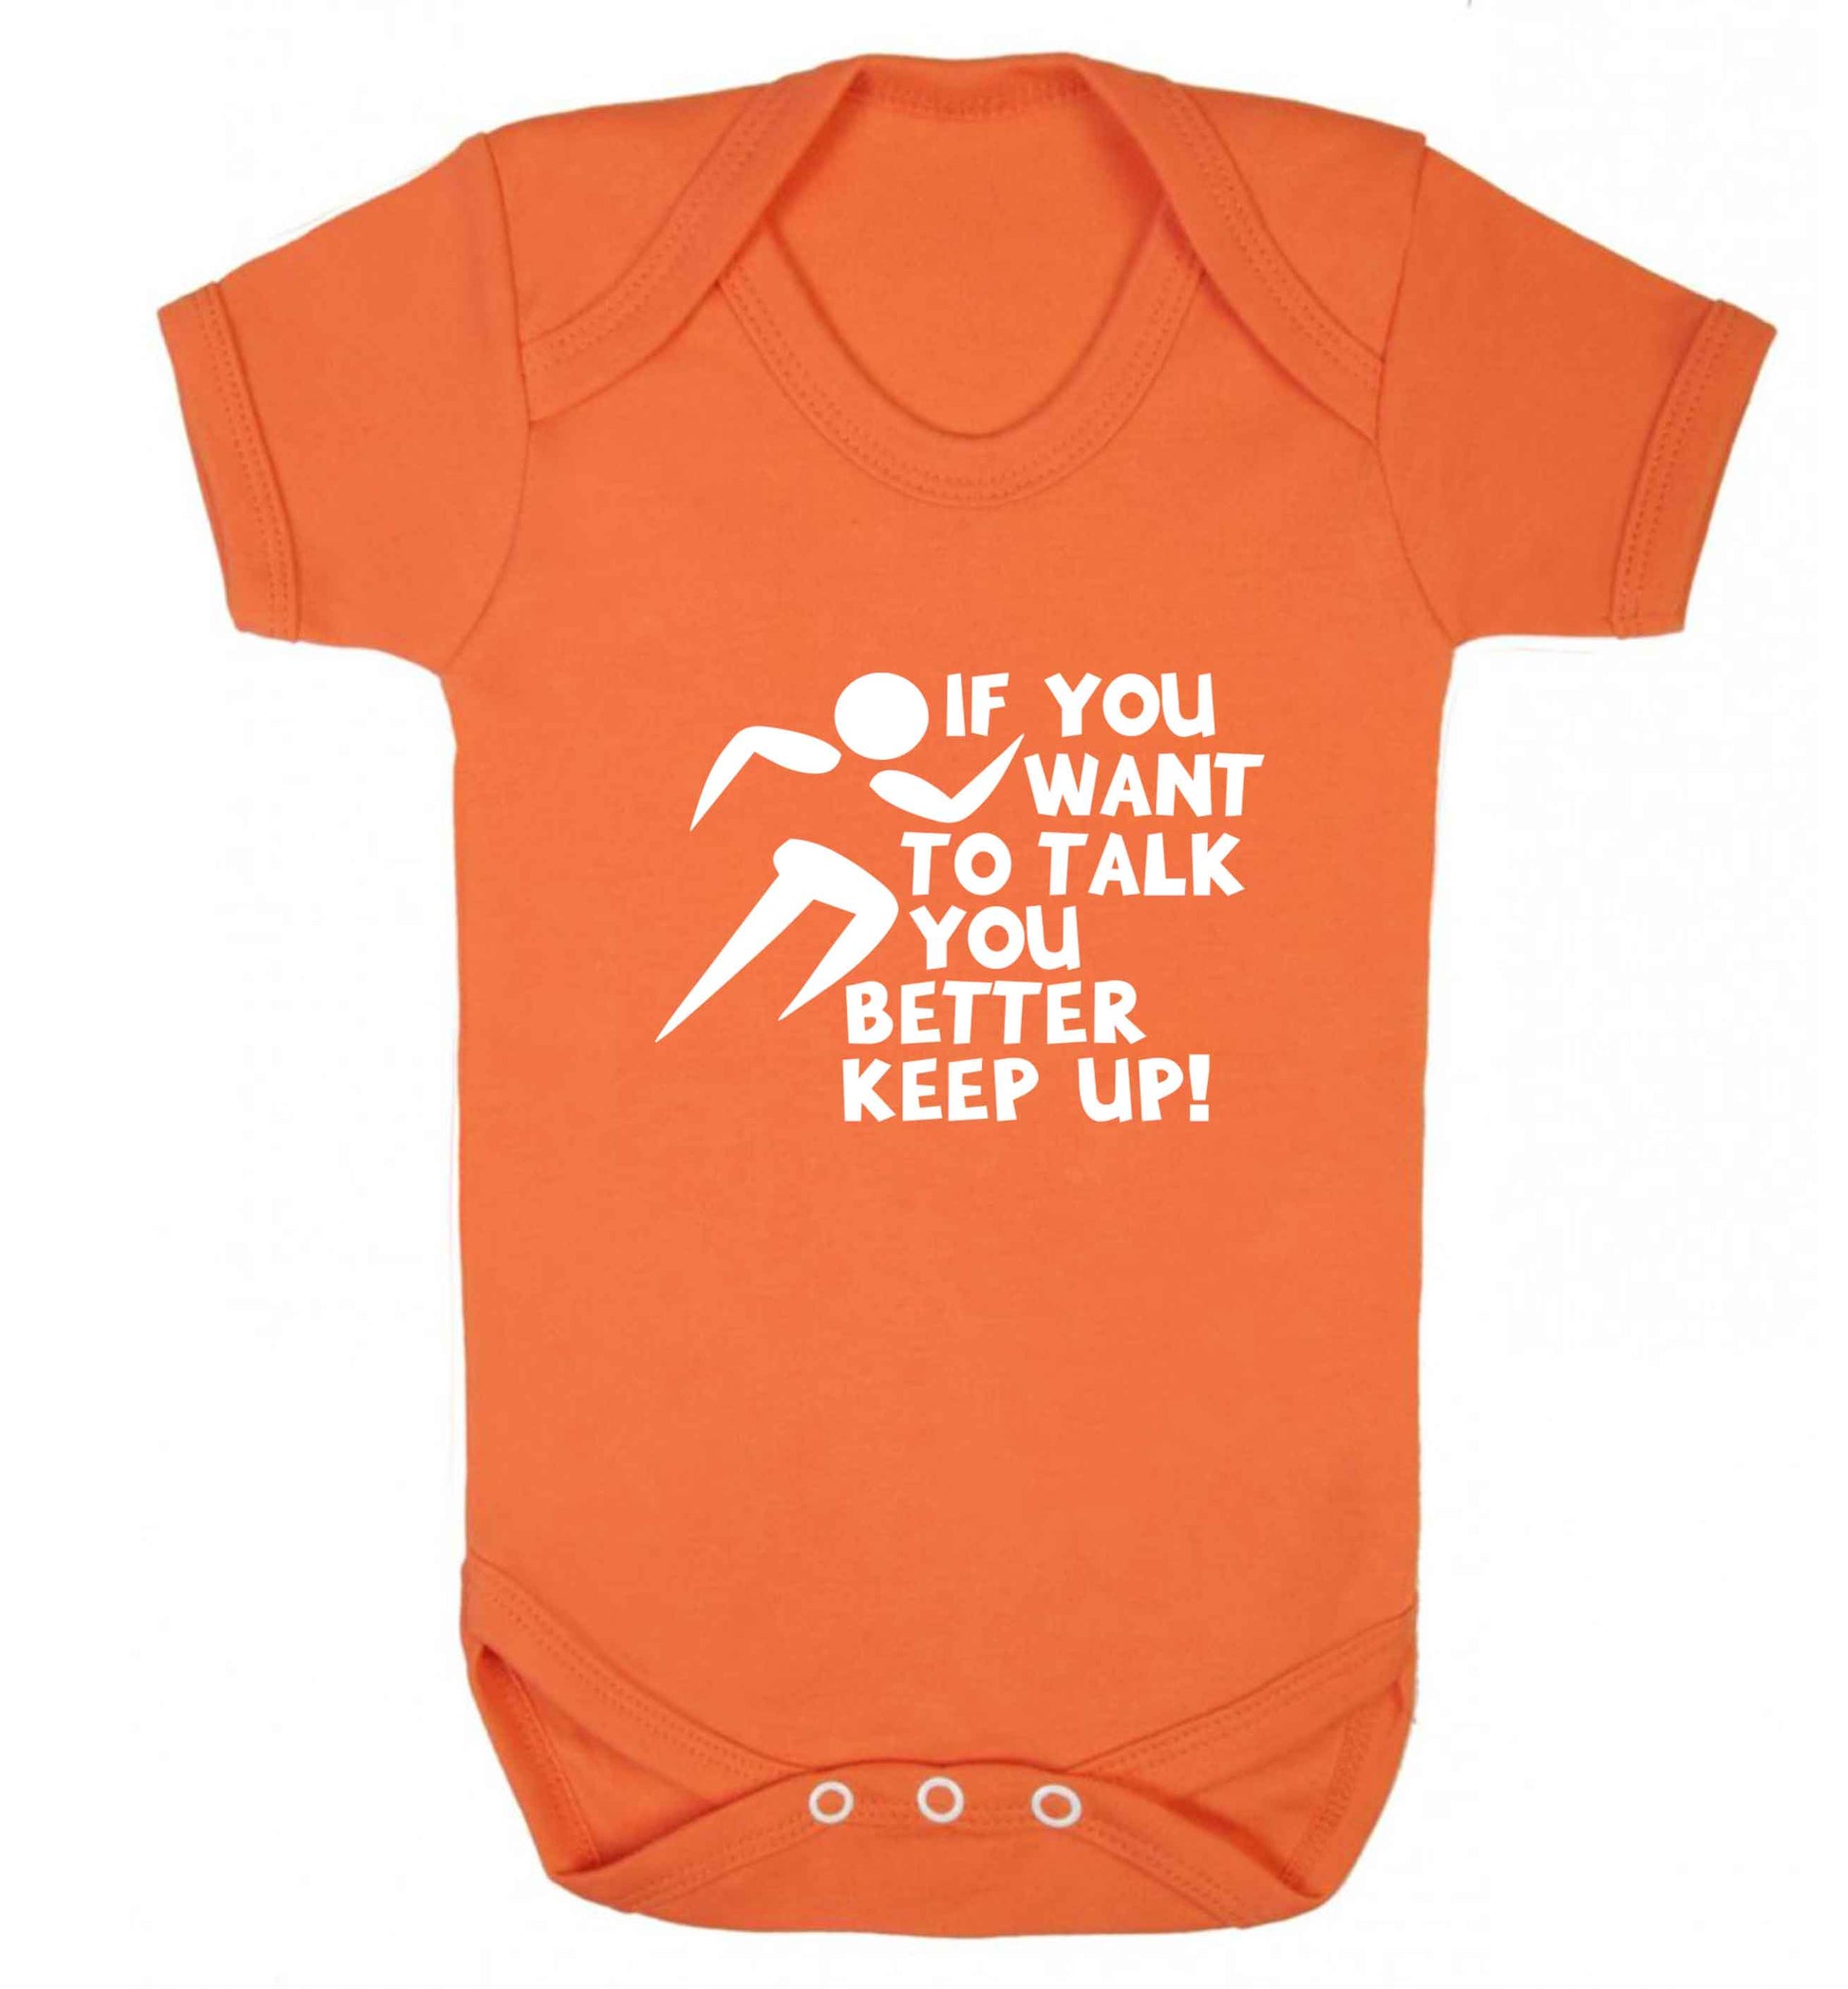 If you want to talk you better keep up! baby vest orange 18-24 months